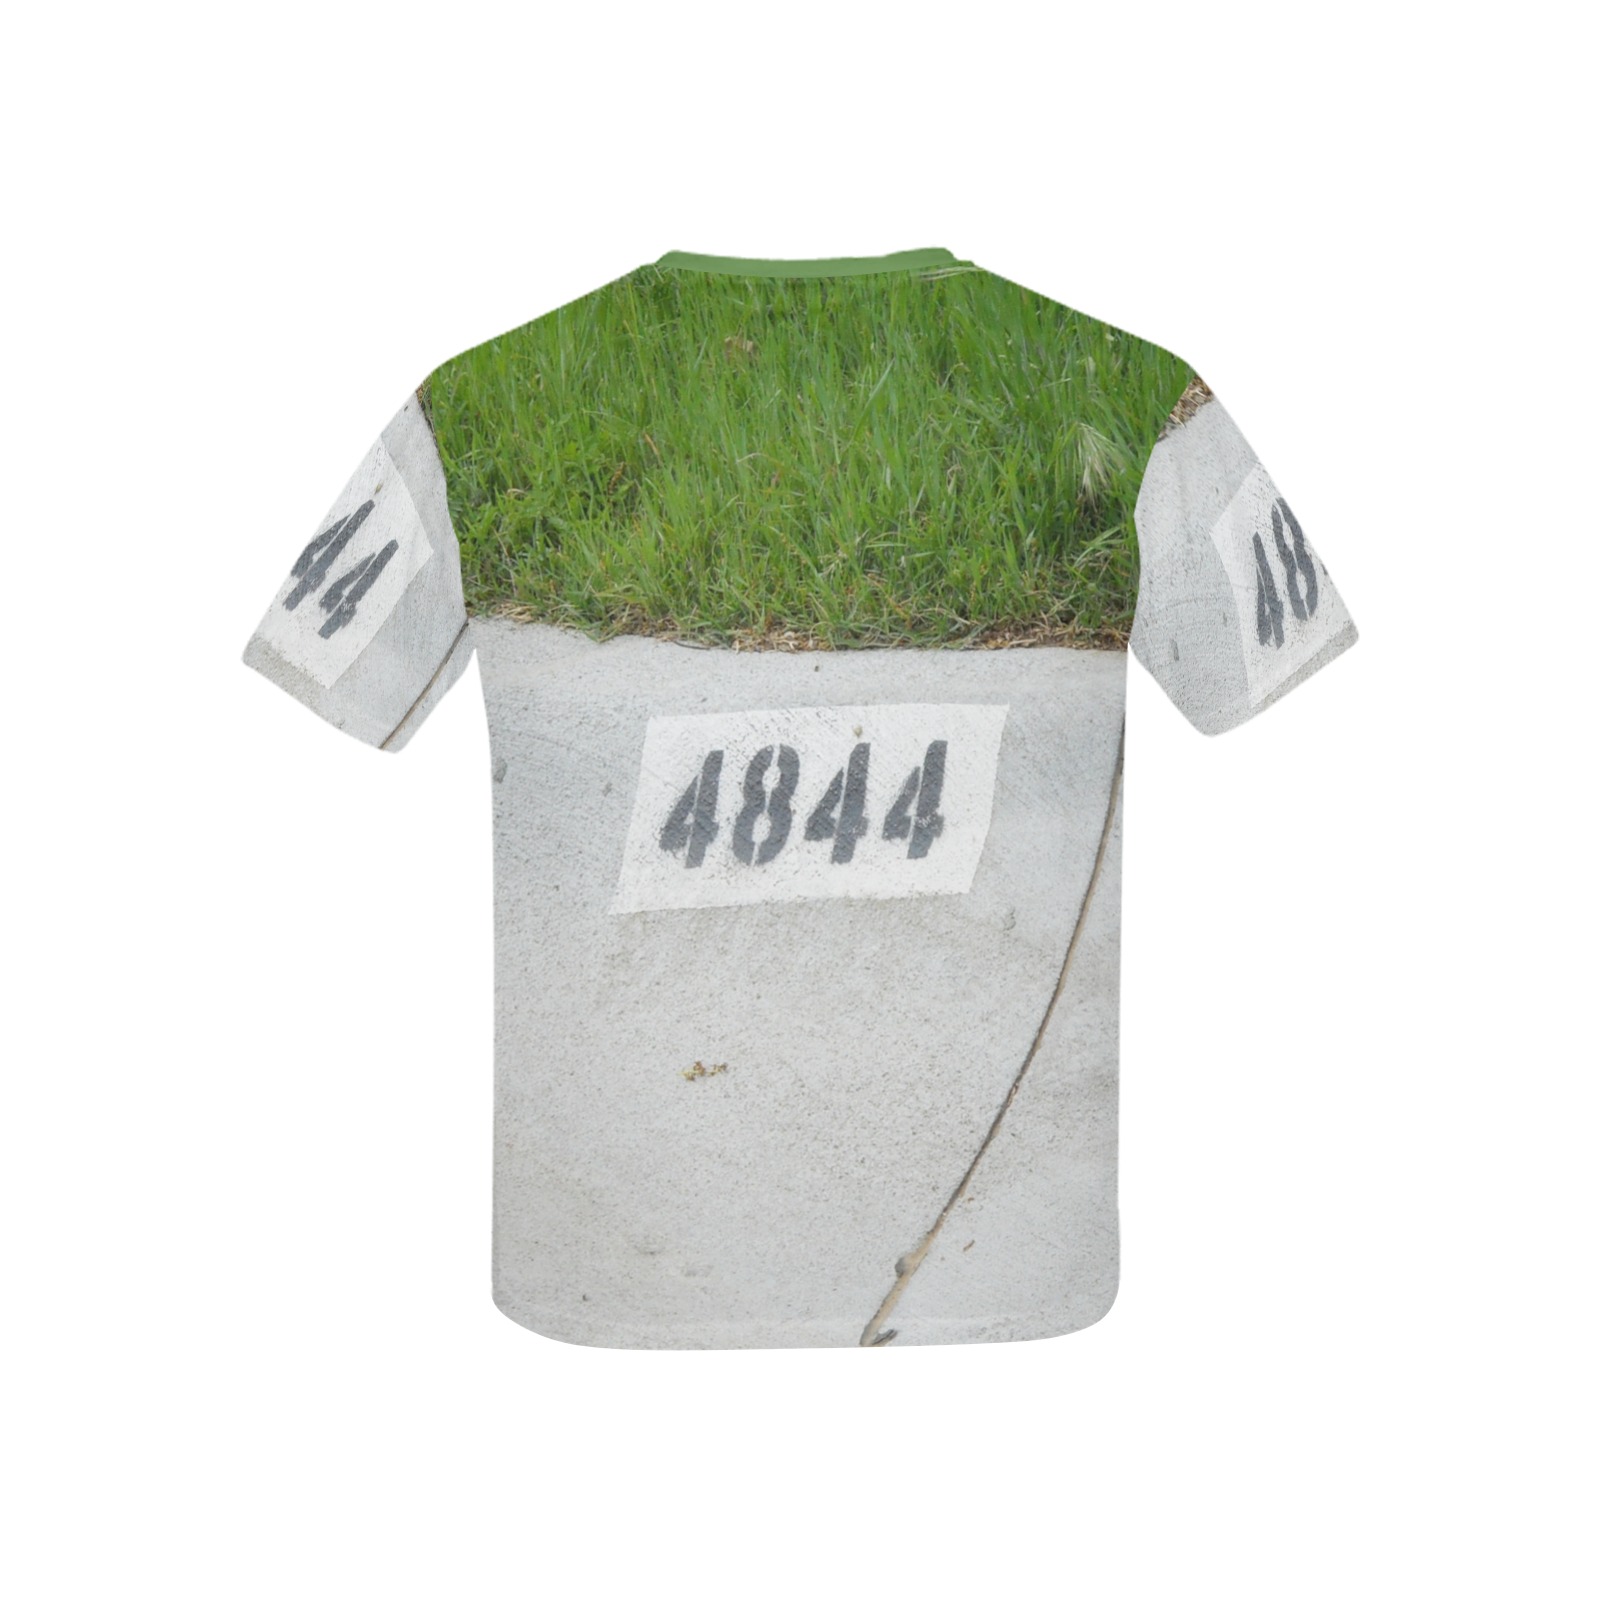 Street Number 4844 with green collar Kids' Mesh Cloth T-Shirt with Solid Color Neck (Model T40)